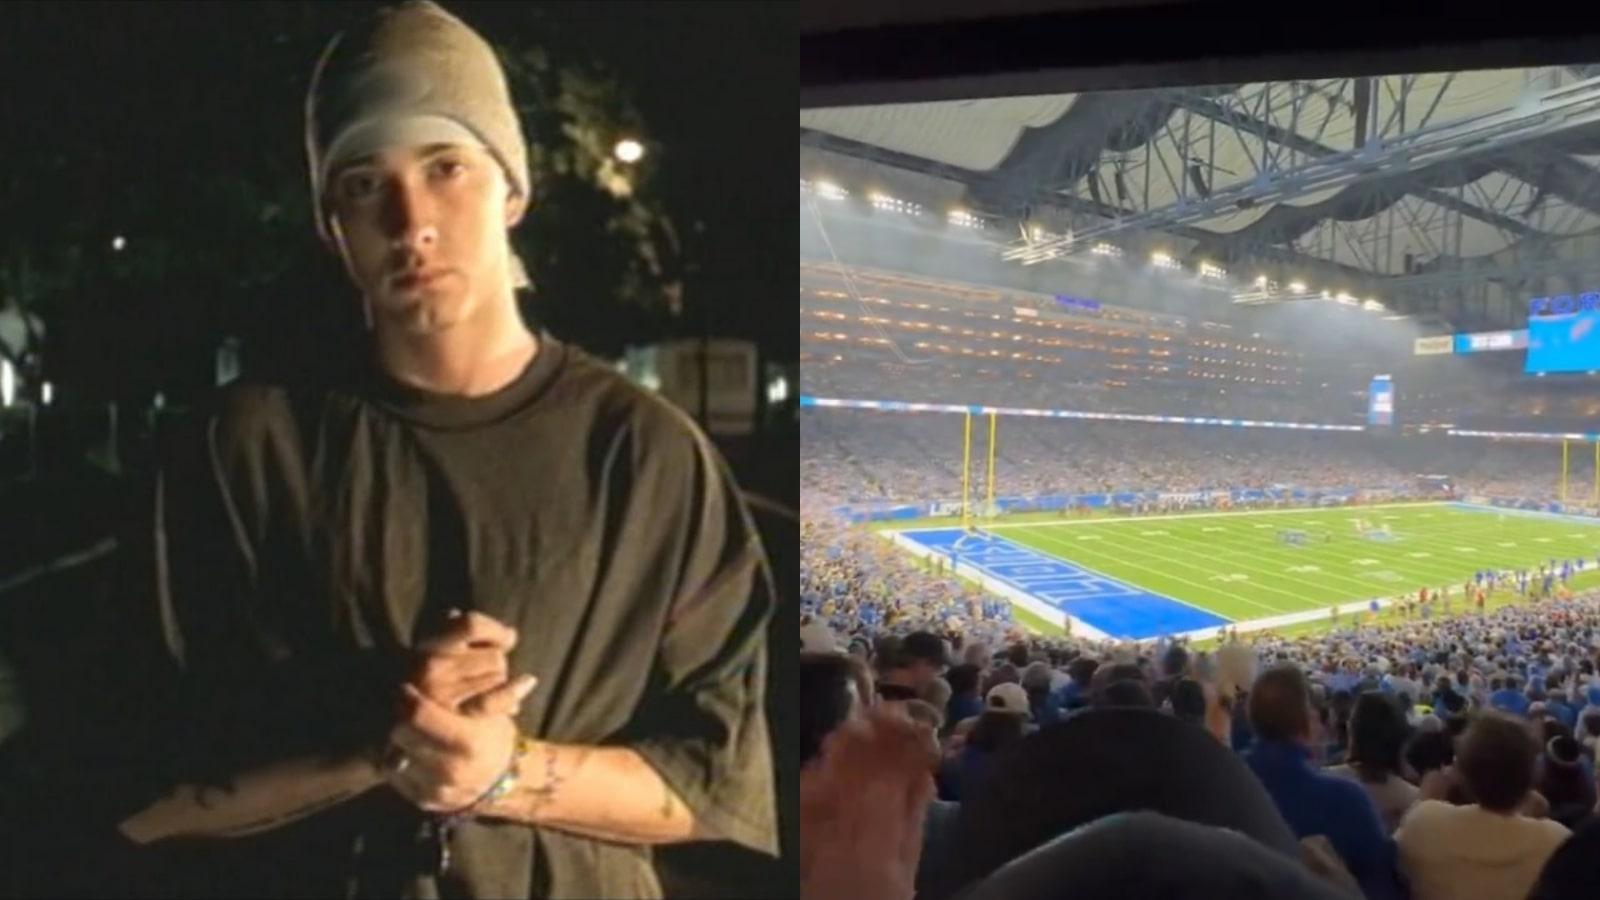 Eminem and fans in a side-by-side photo